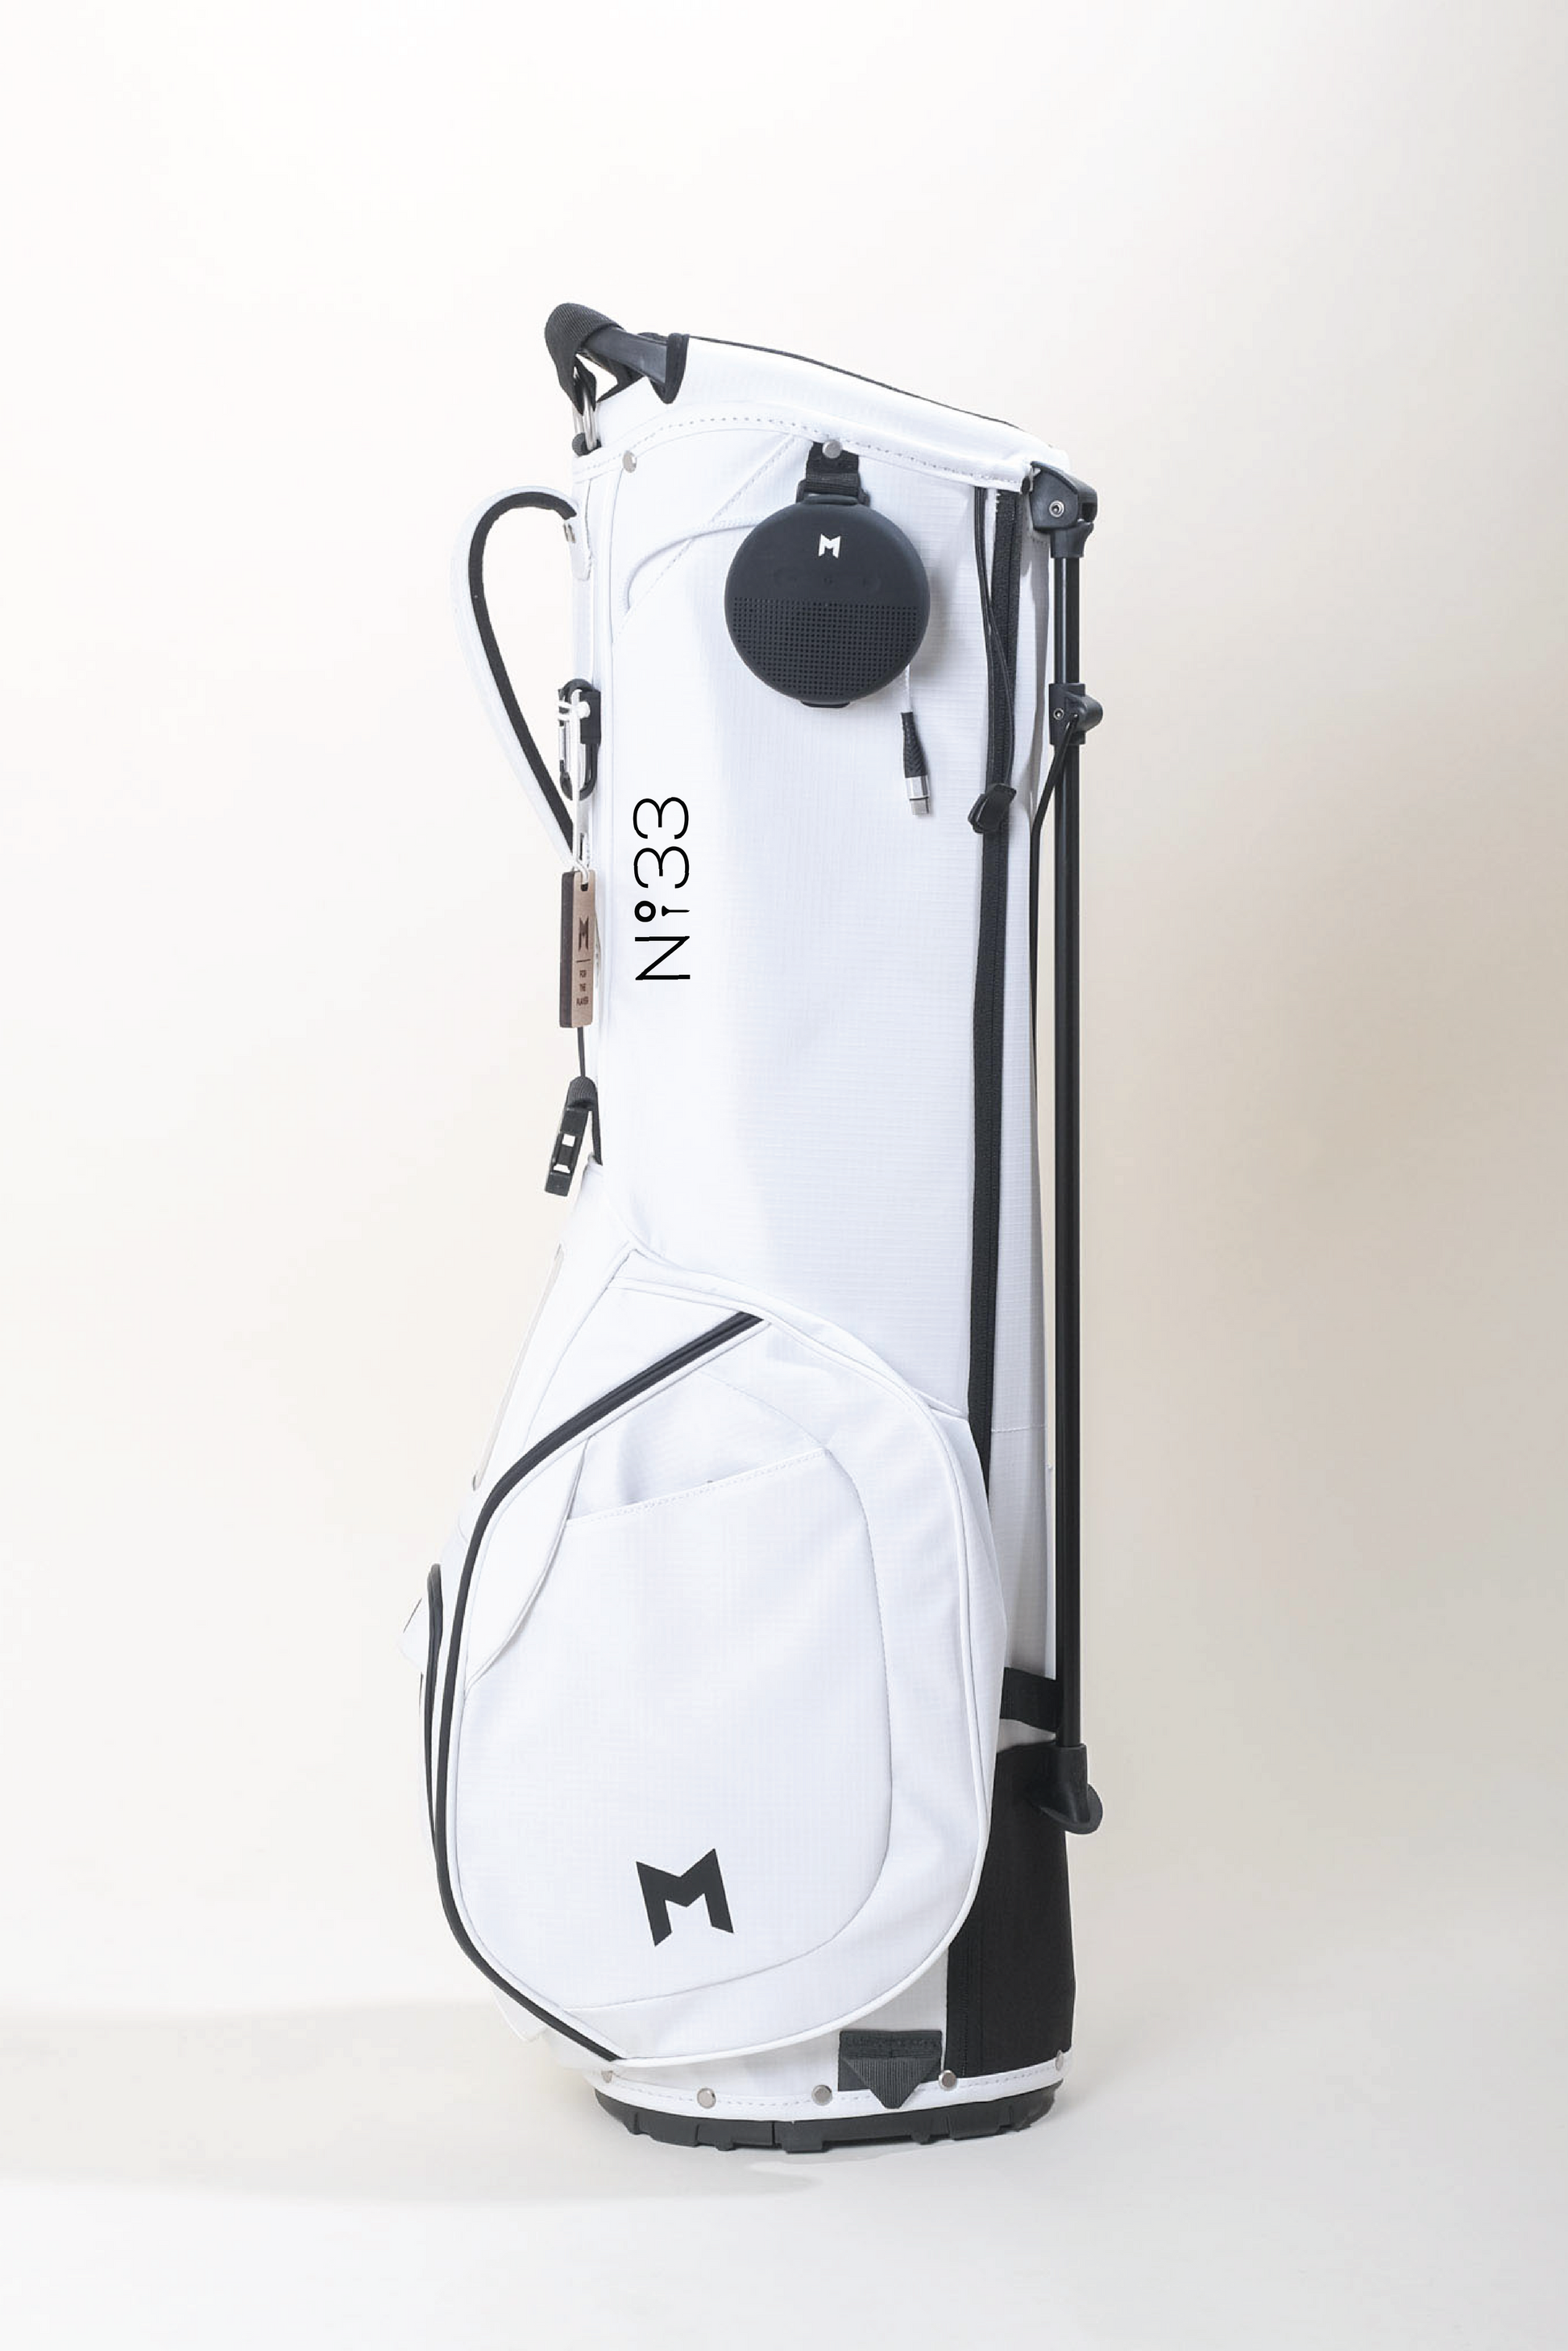 MNML GOLF and The Number Thirty Three collaborated on a brand new MR1 golf bag. 